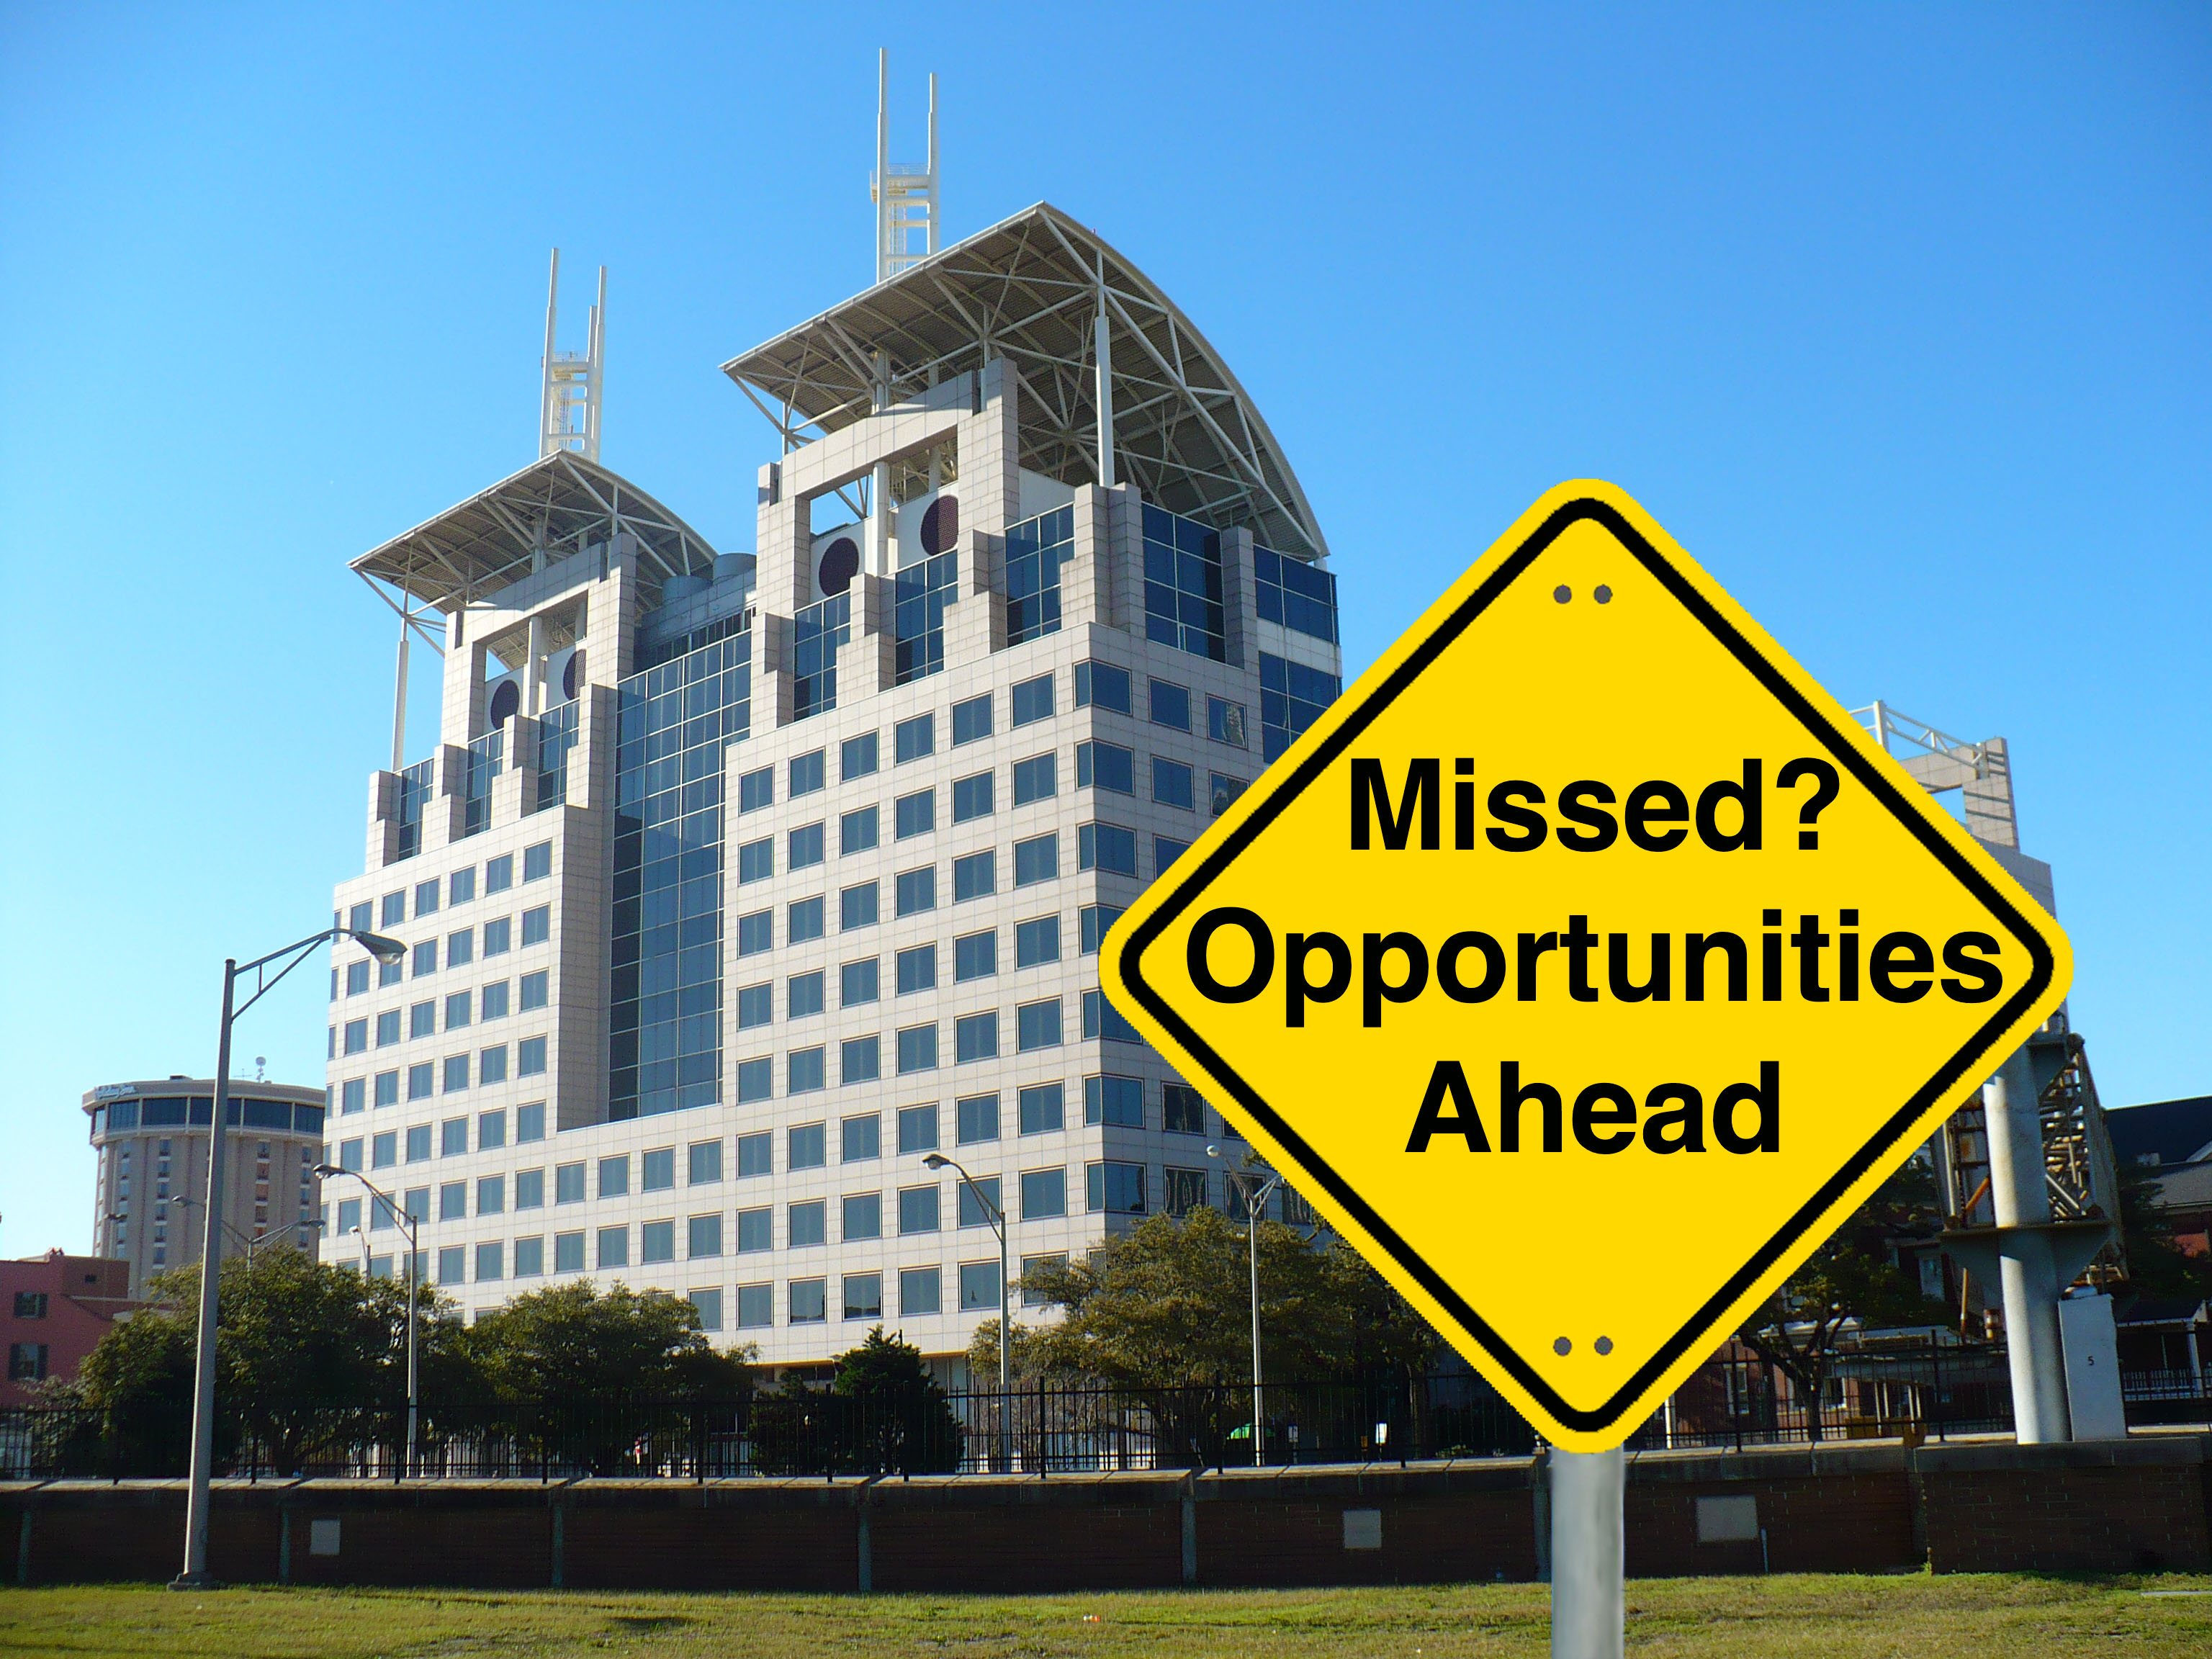 A yellow Caution road sign reading "Missed? Opportunities Ahead" in the foreground of a picture of Mobile Government Plaza